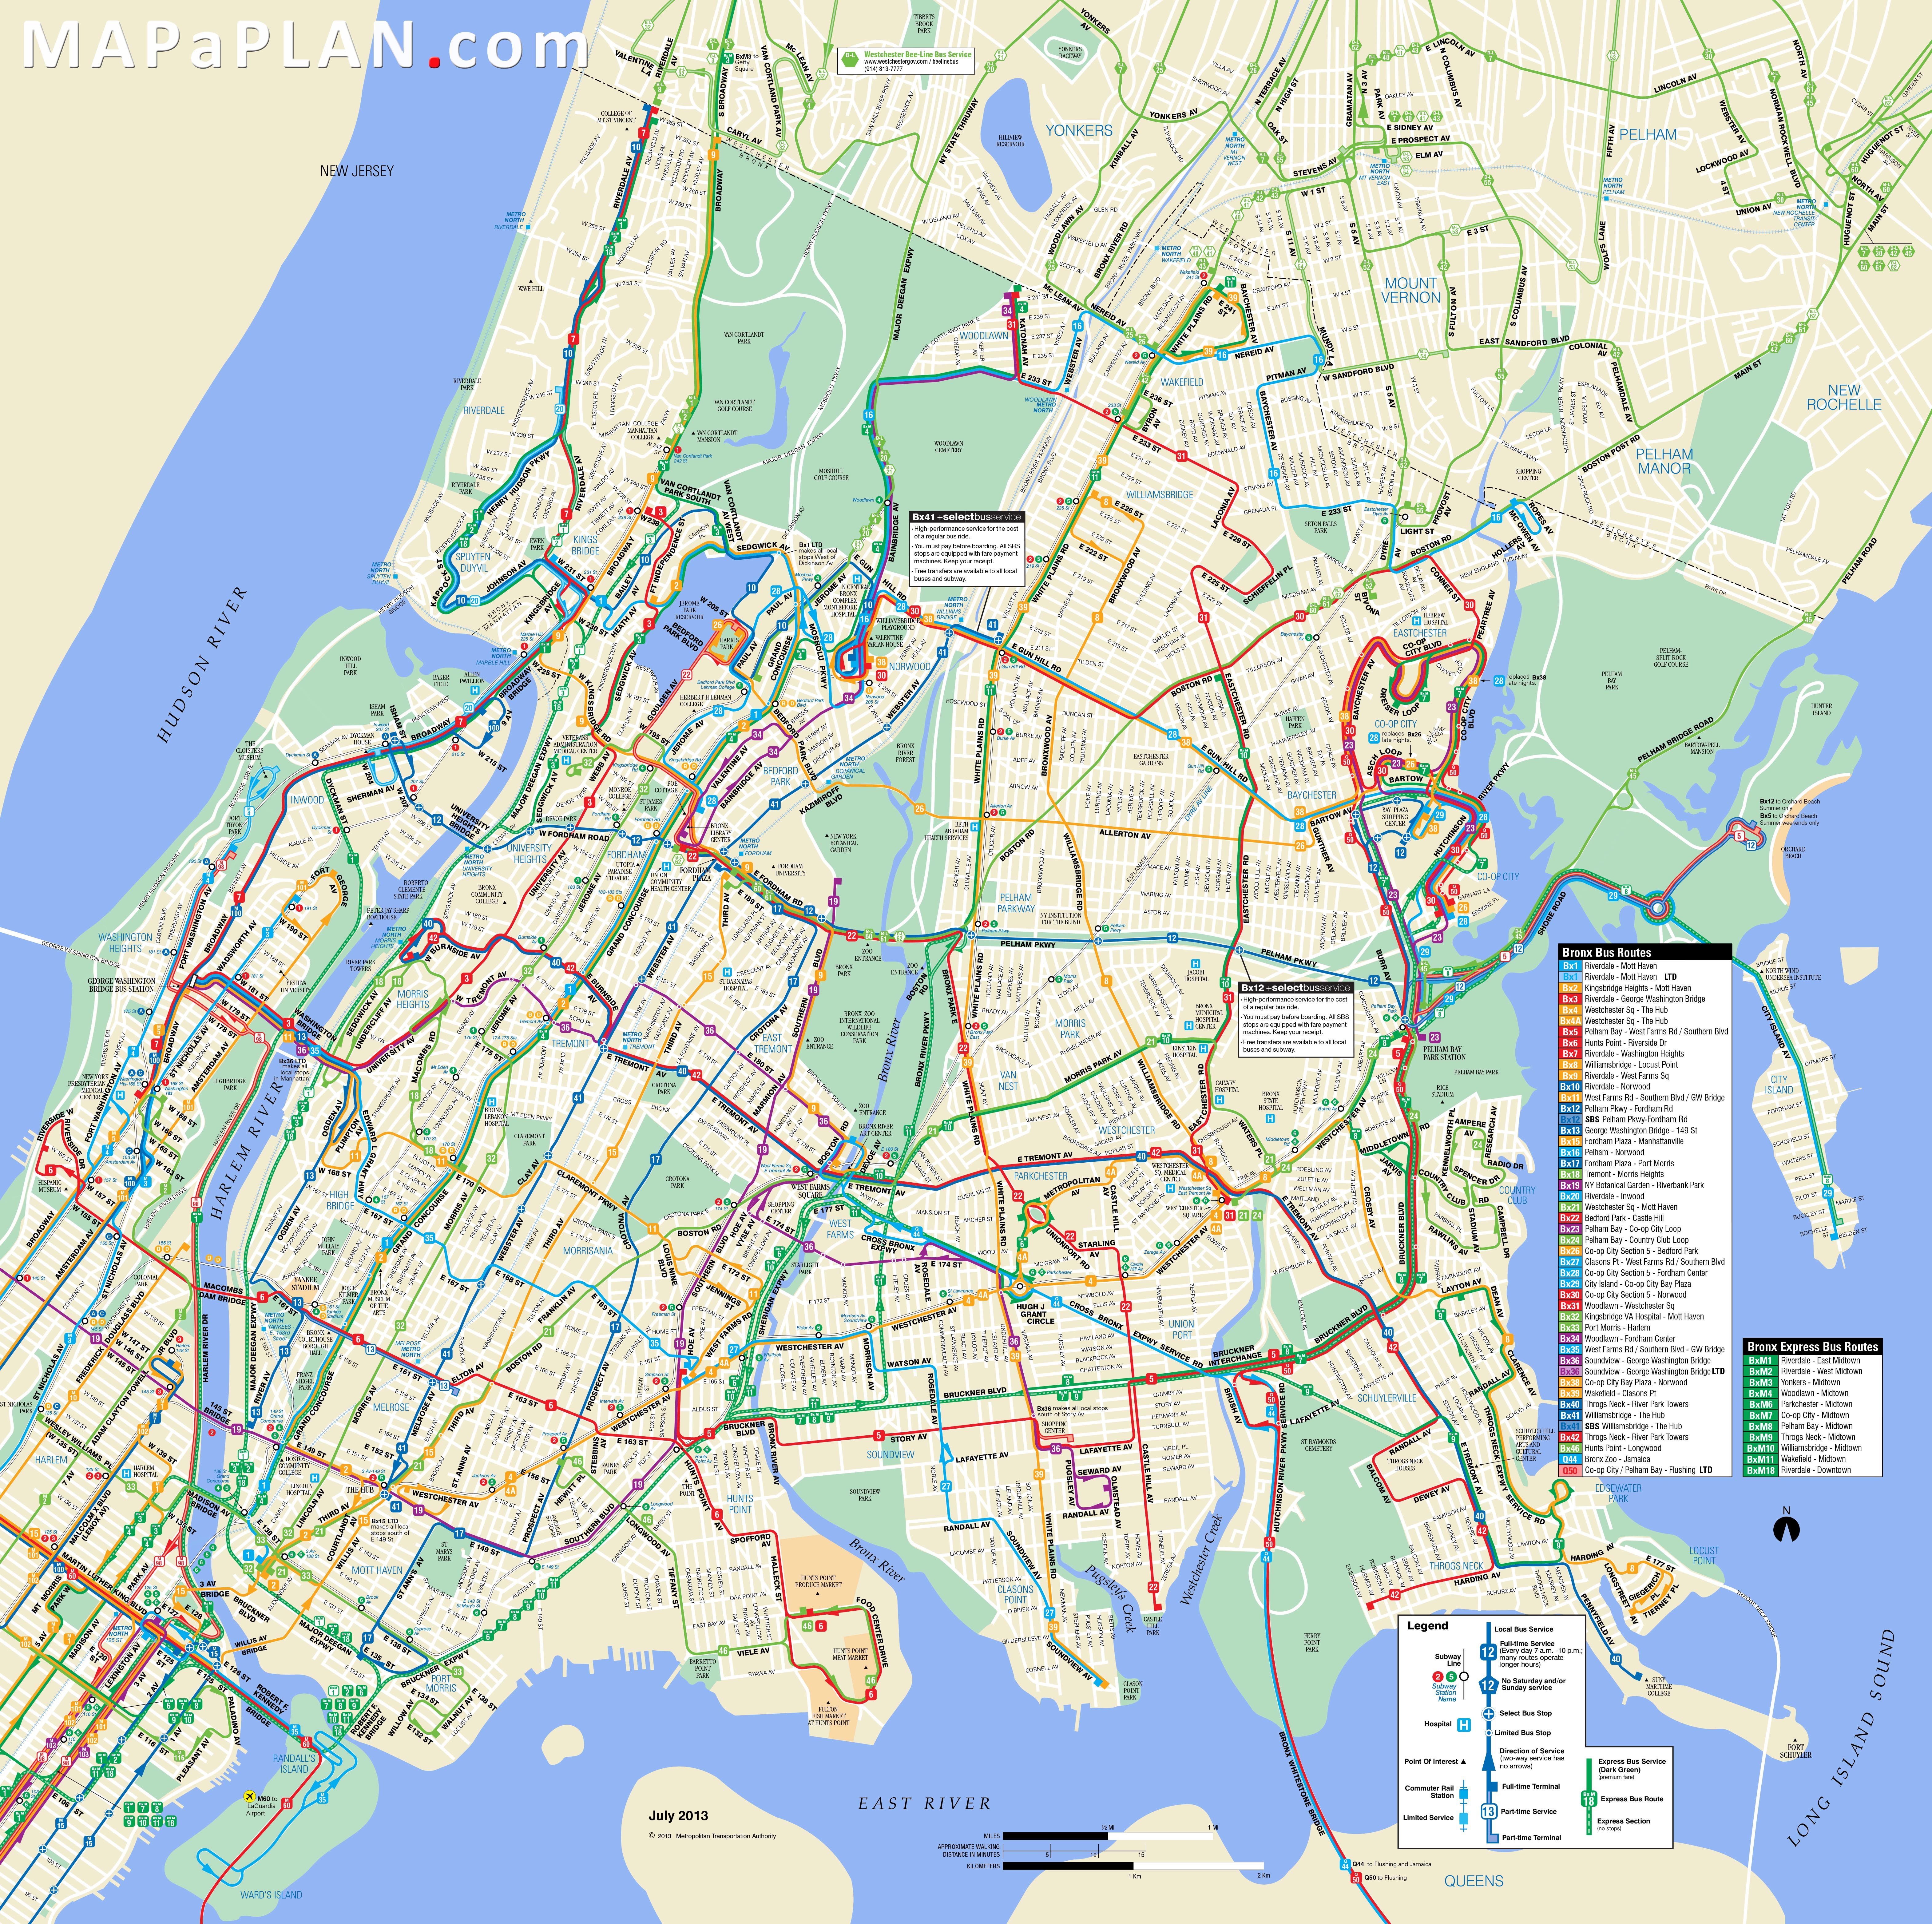 bronx-bus-map-new-york-top-tourist-attractions-map